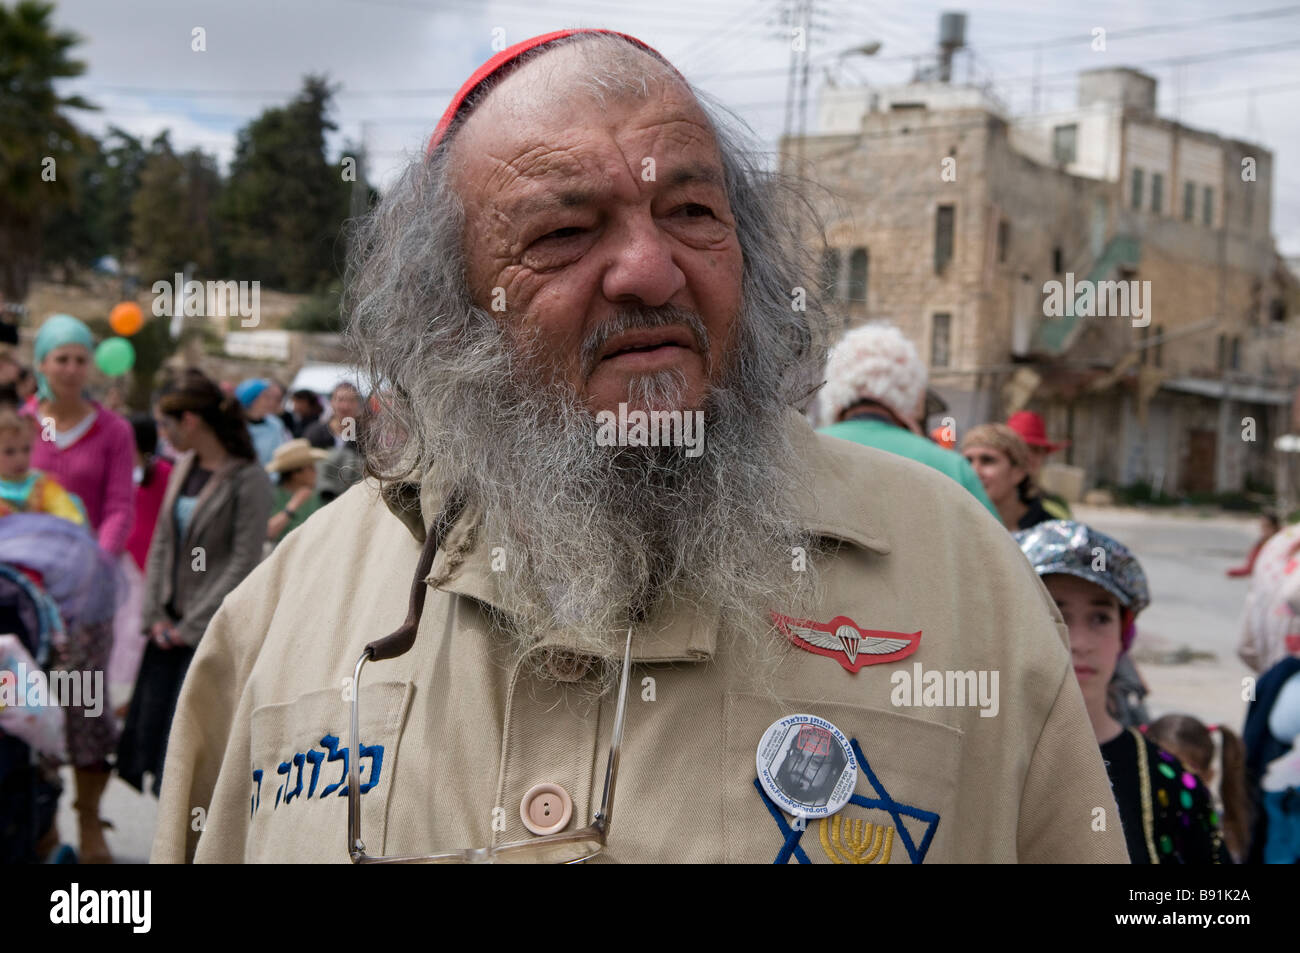 A Jewish settler wears military costume during the annual parade marking the Jewish holiday of Purim in the old city of Hebron West bank Israel Stock Photo